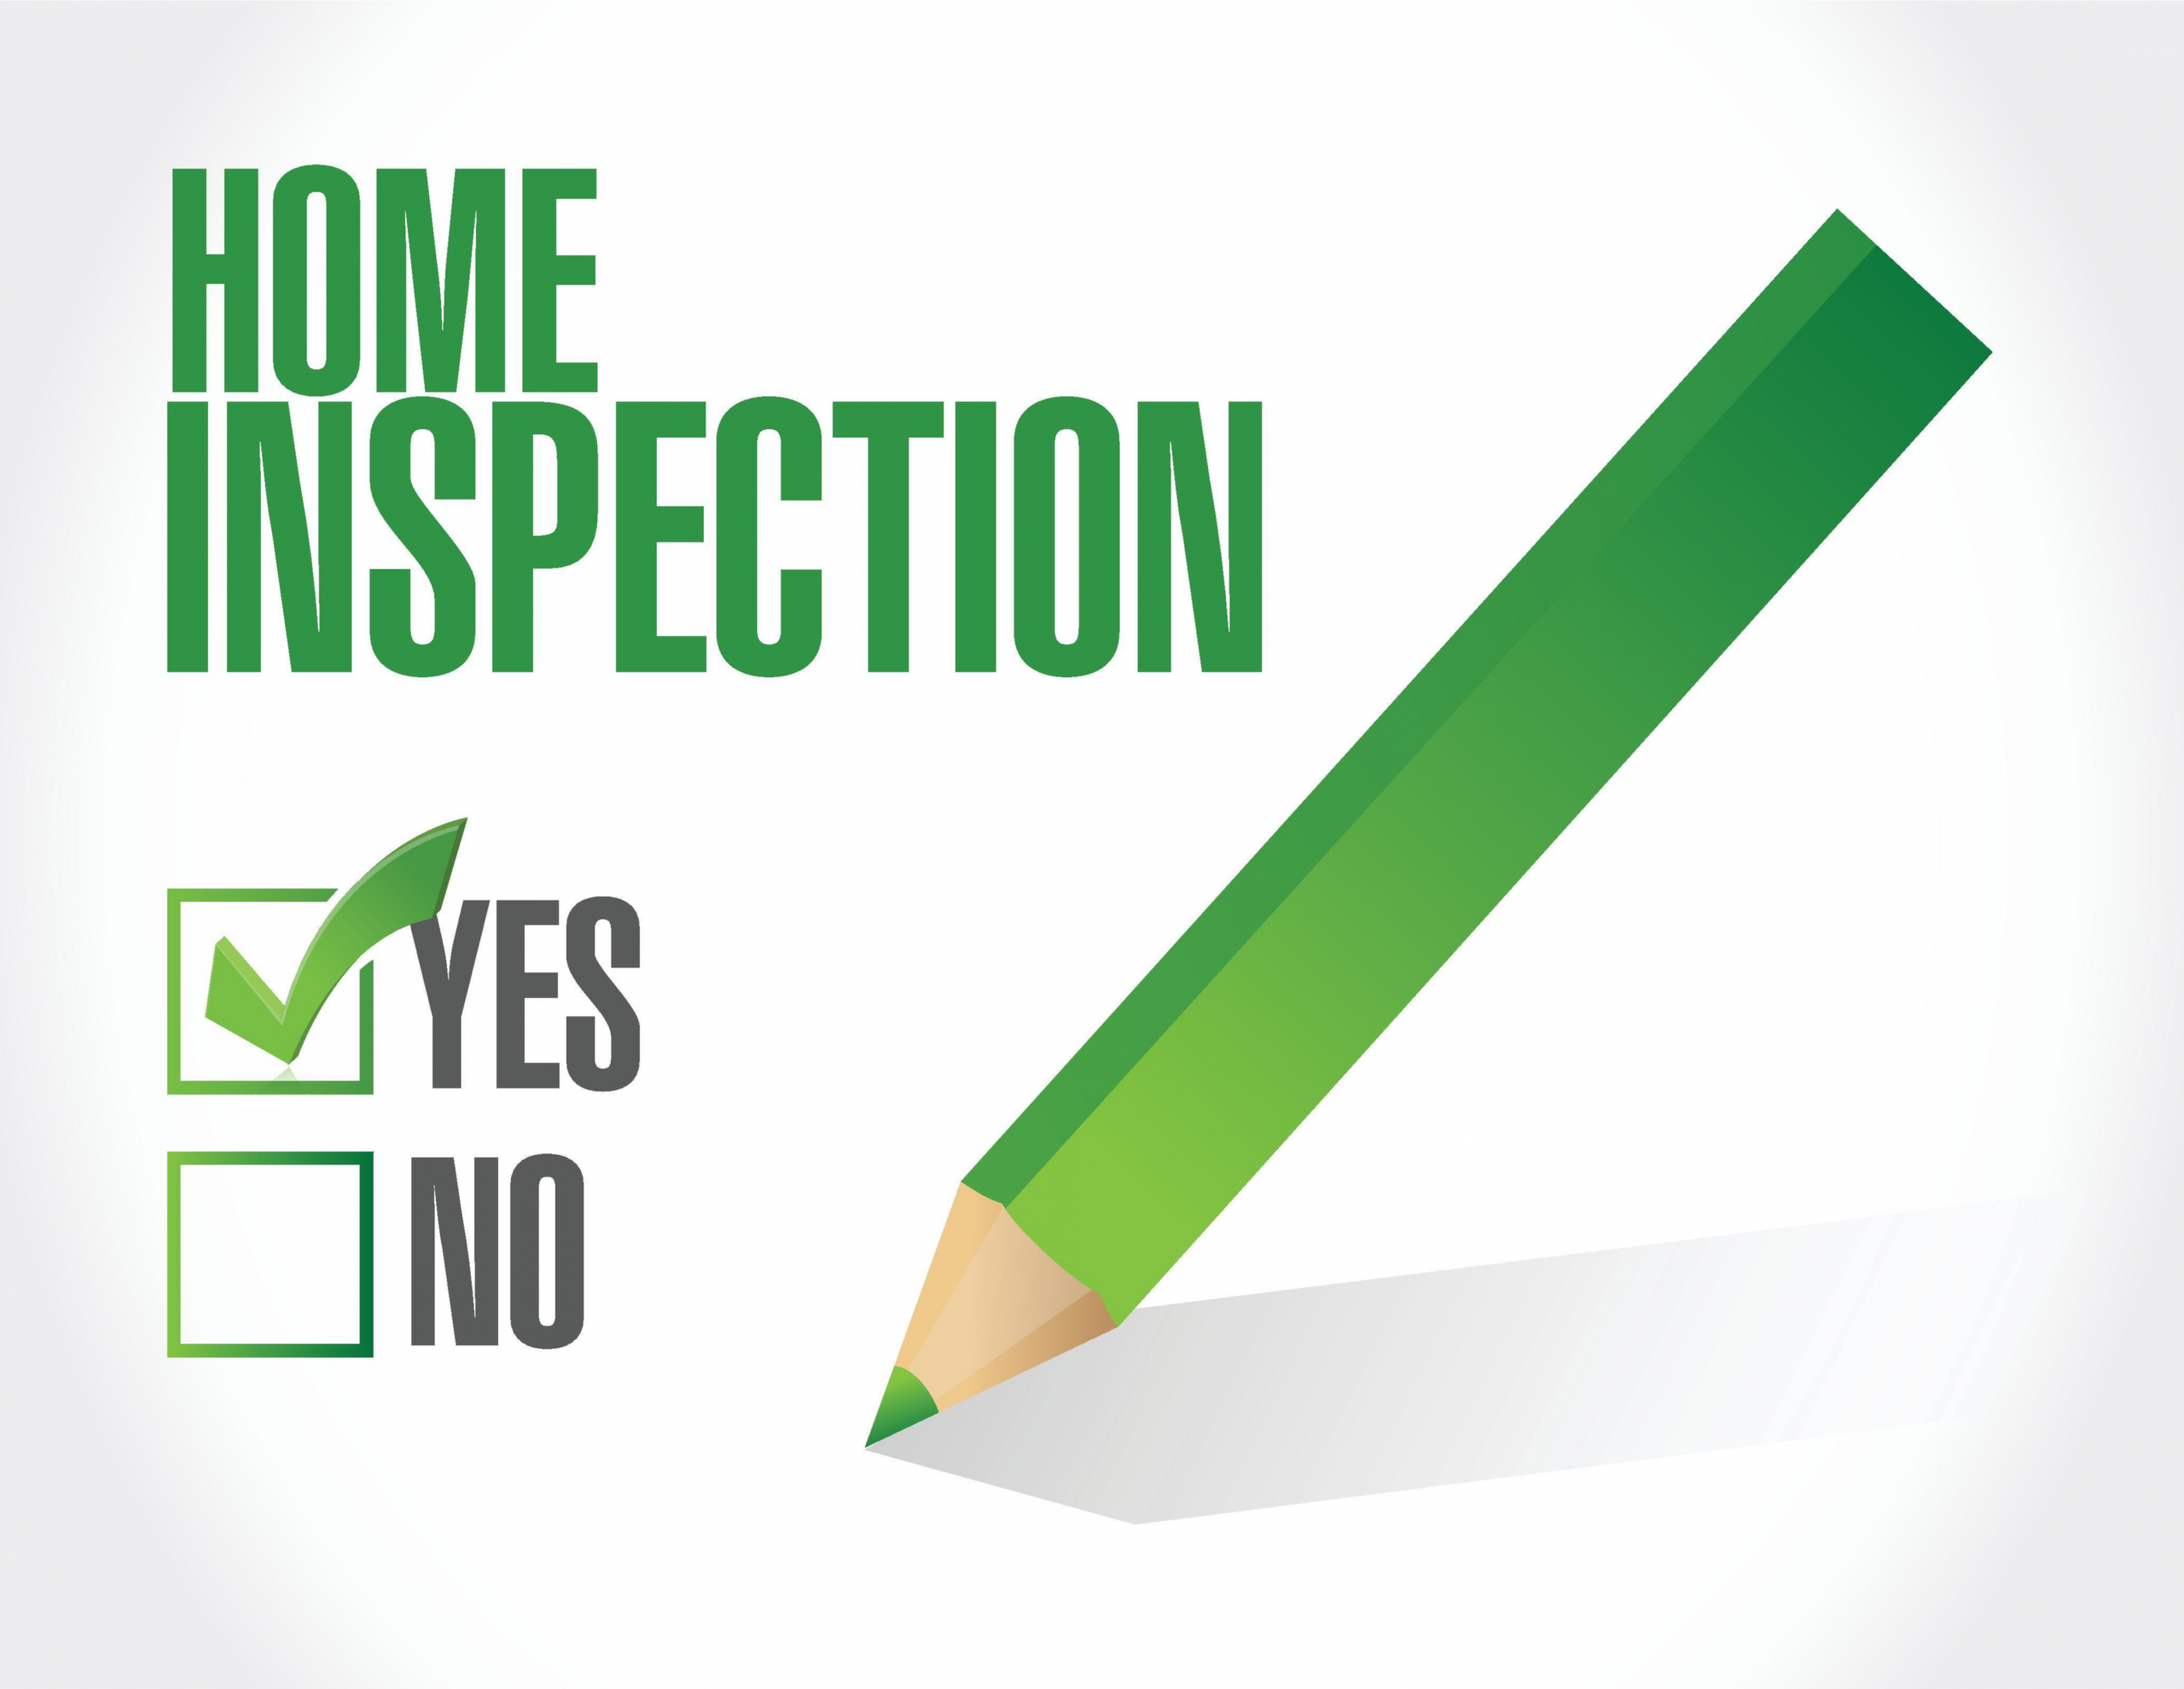 Home inspection with a checkbox for Yes and No